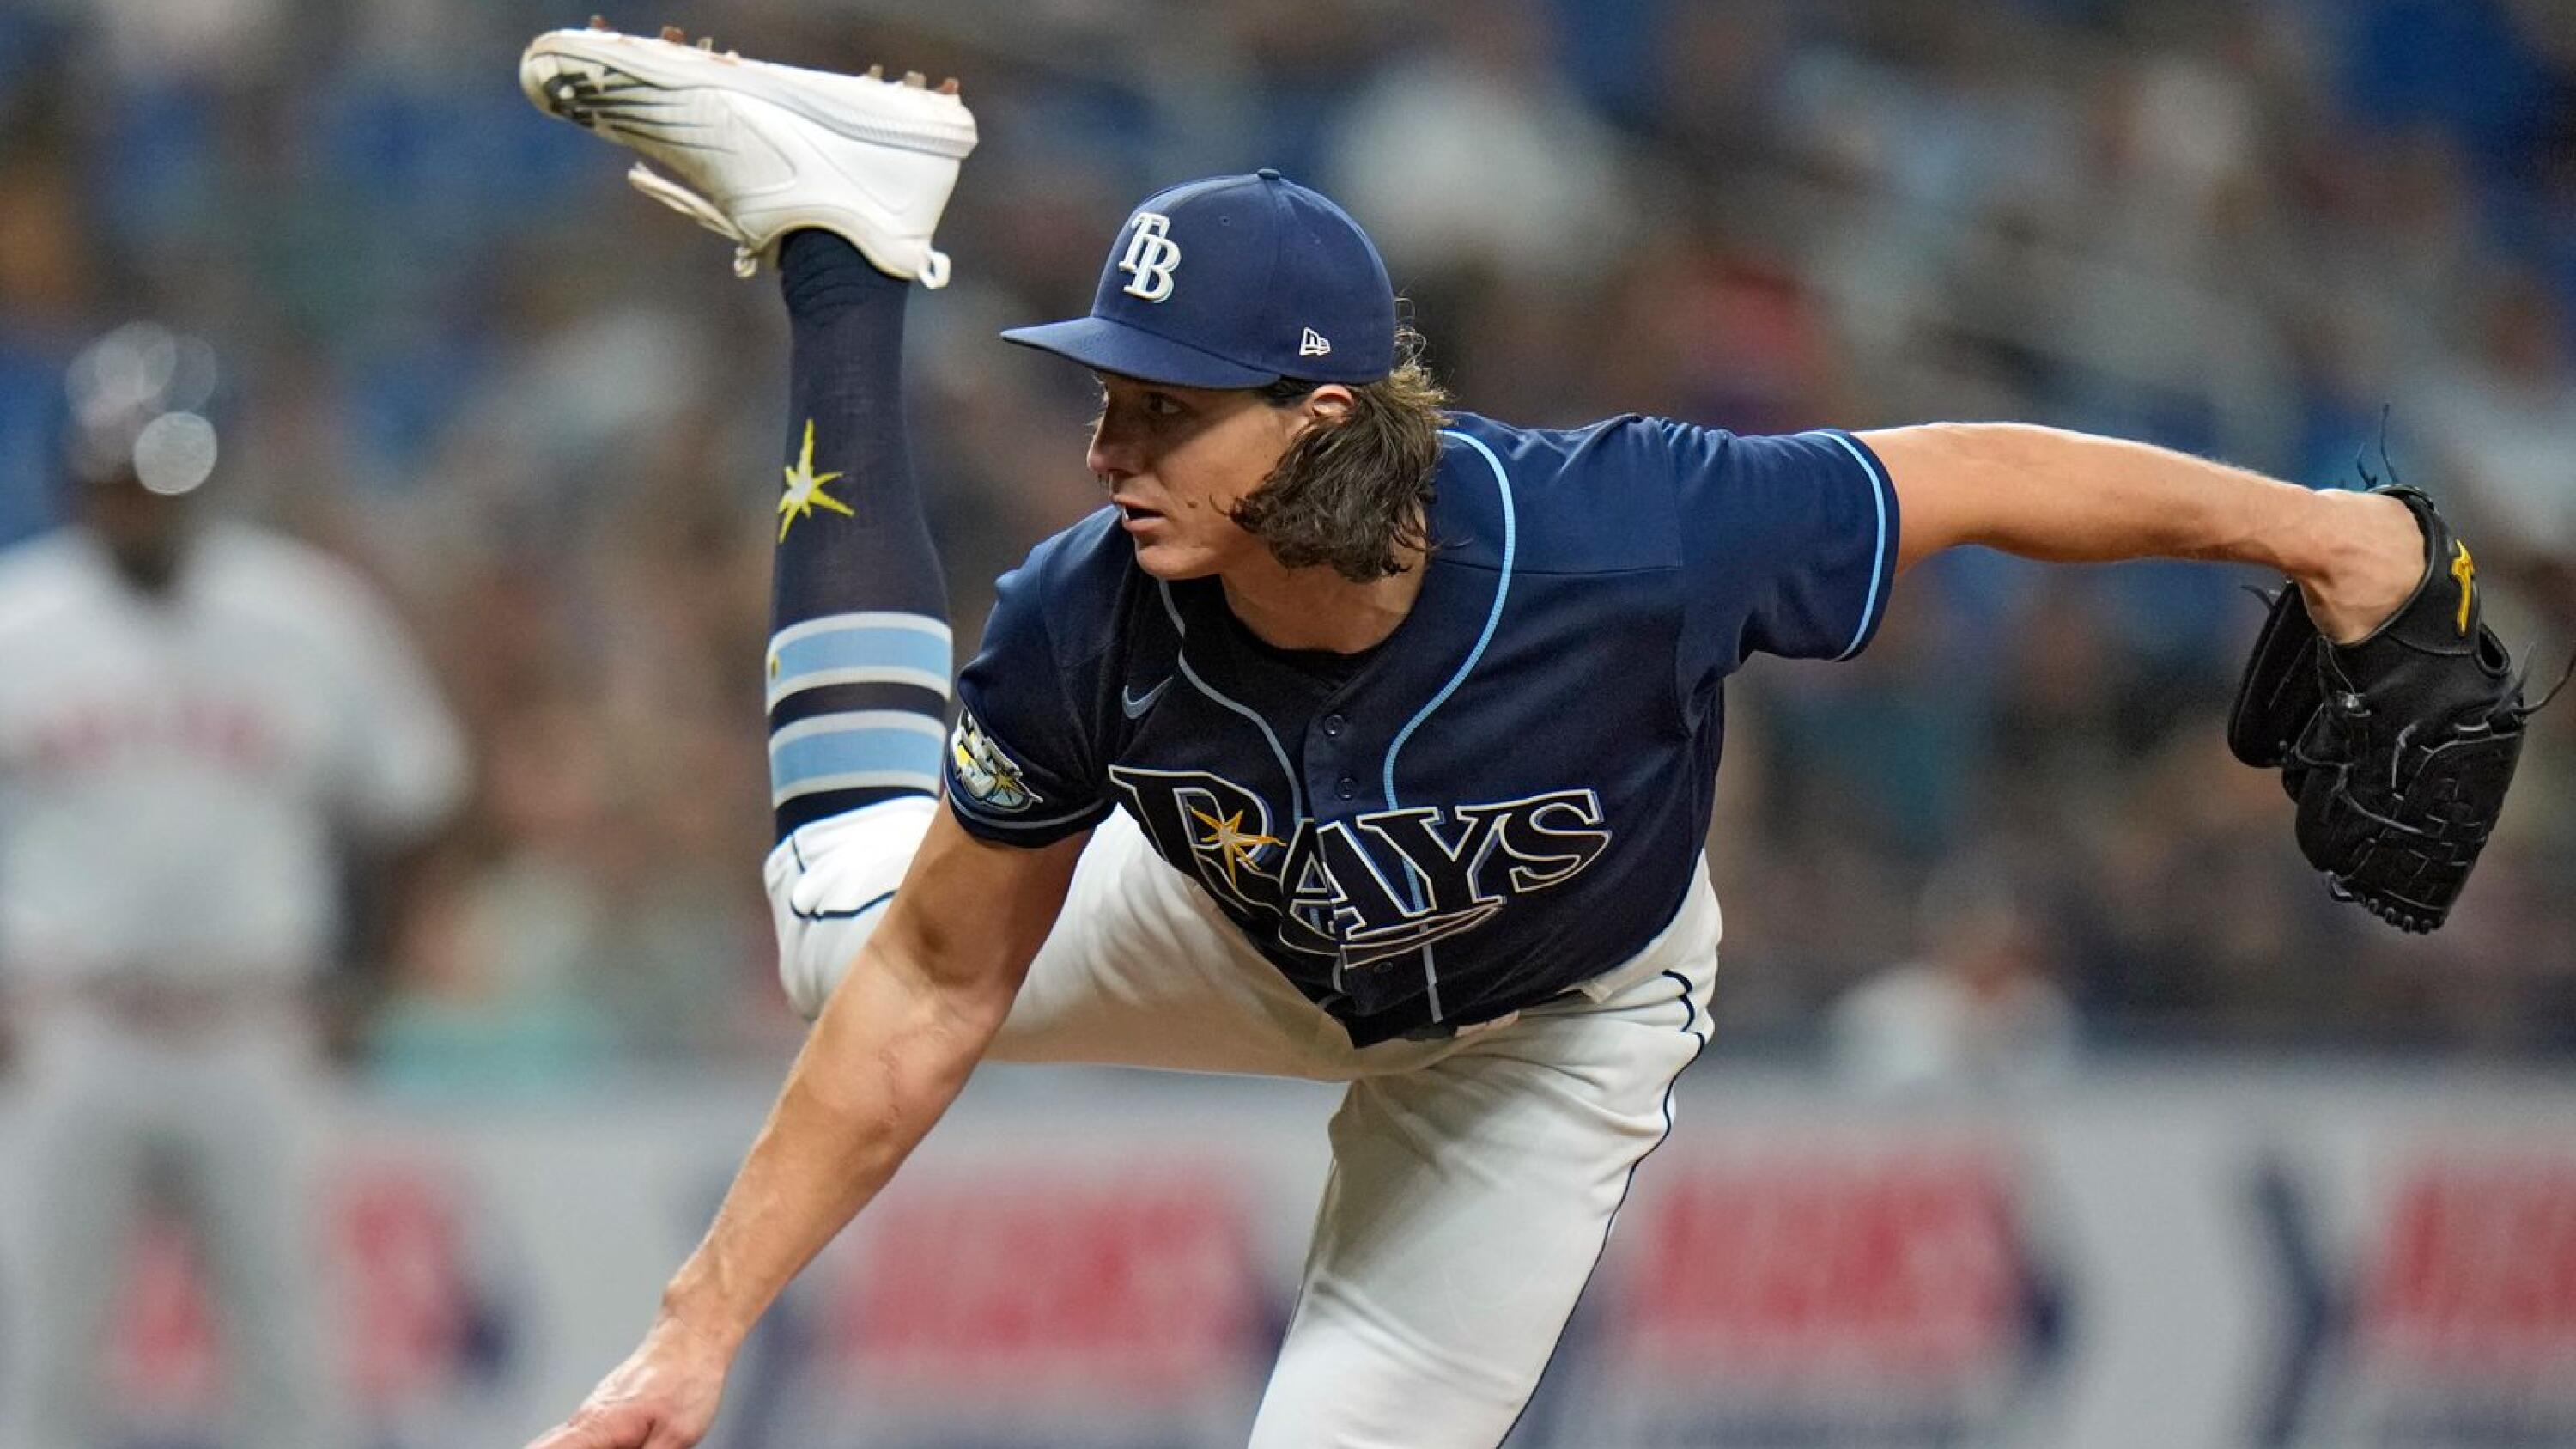 Tyler Glasnow on how the Rays get the most out of pitchers